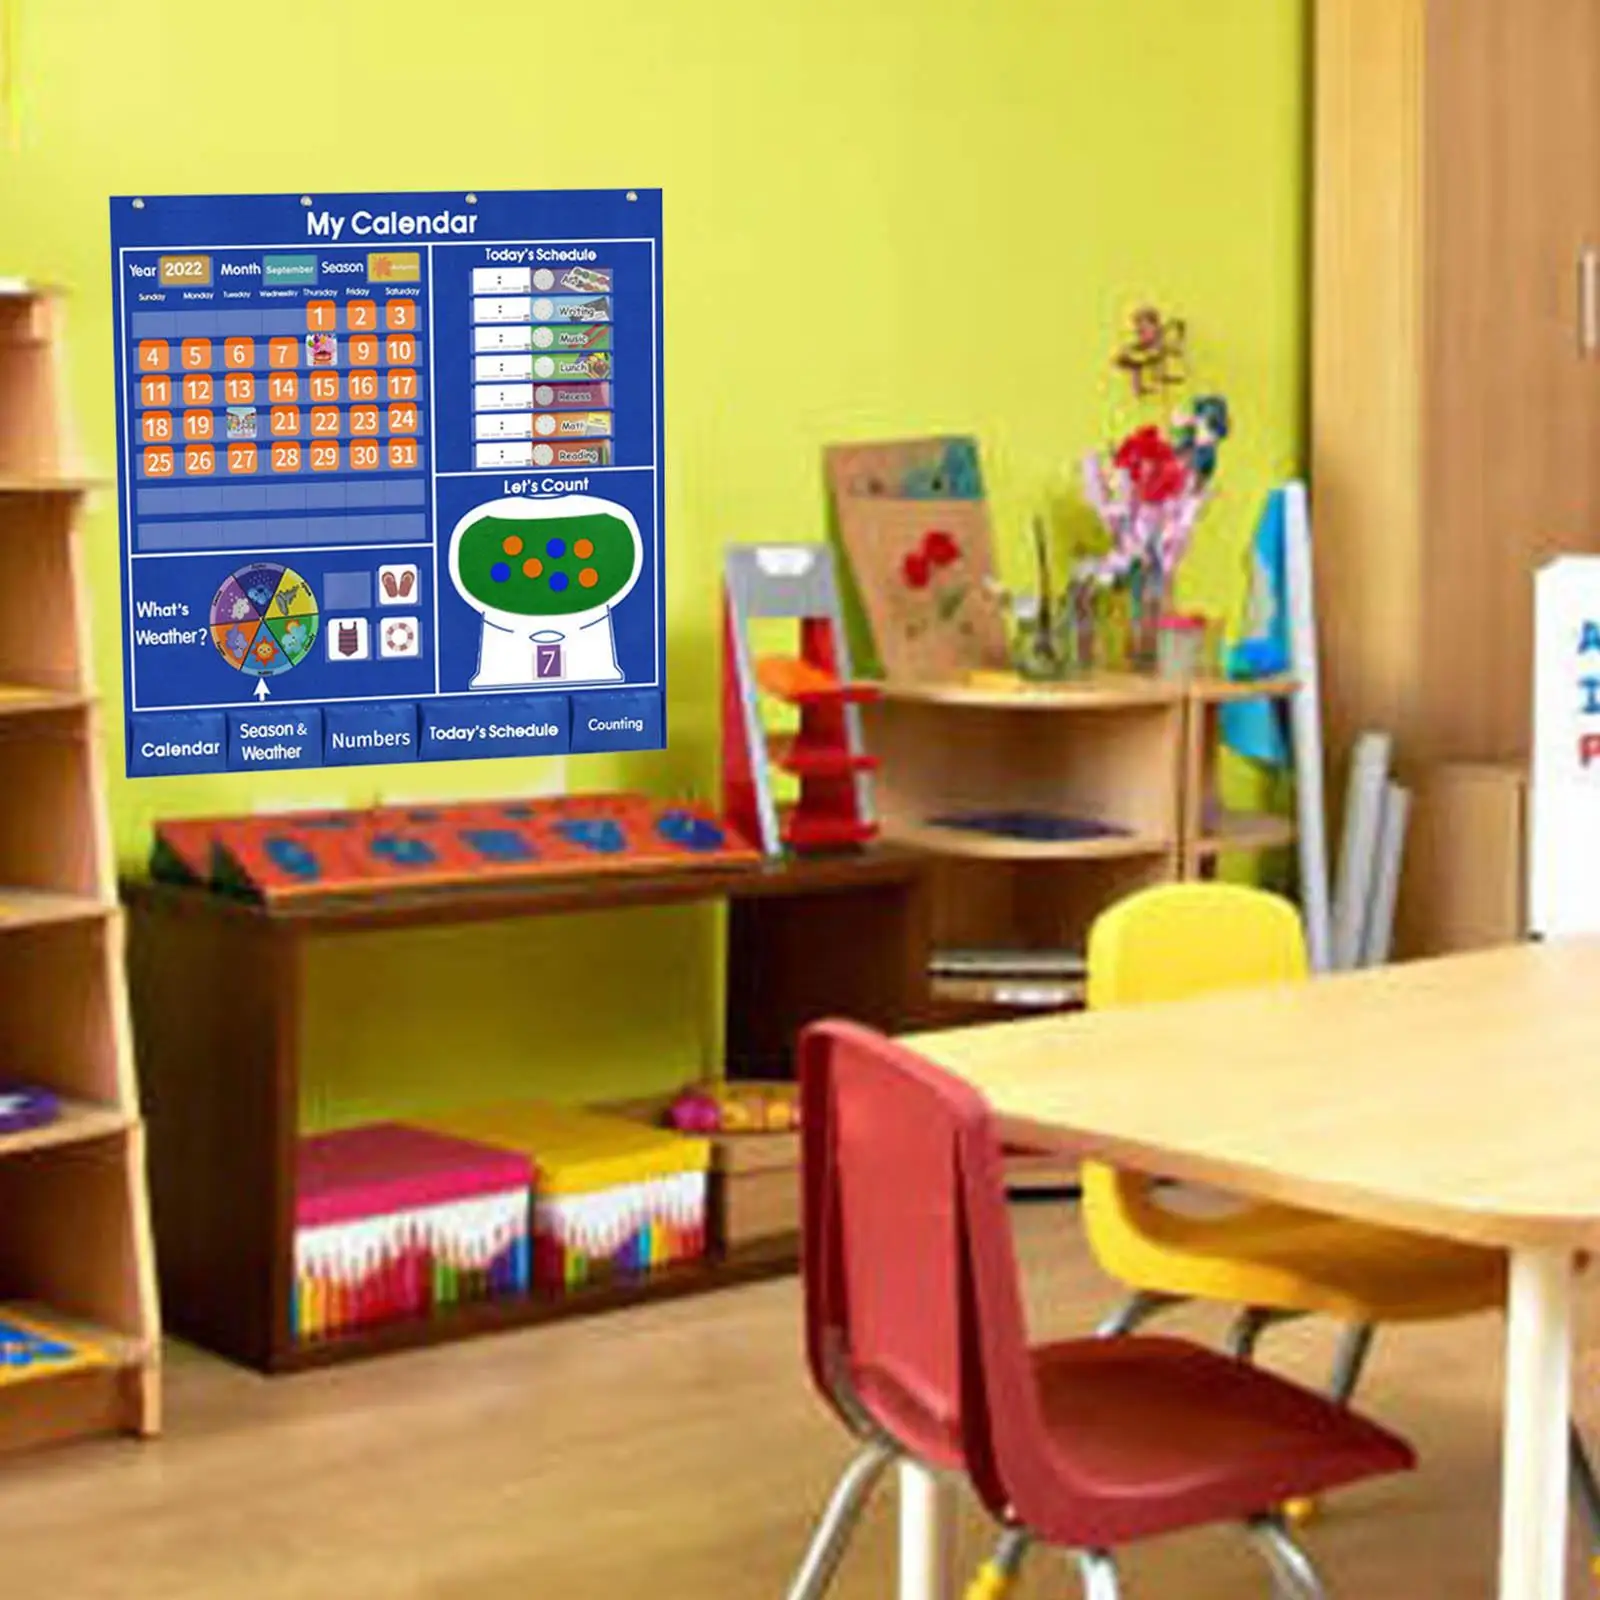 Learning Calendar and Weather  Chart Classroom Calendar Supplies Daily Activities Mathematics for Children  Kids Toddlers